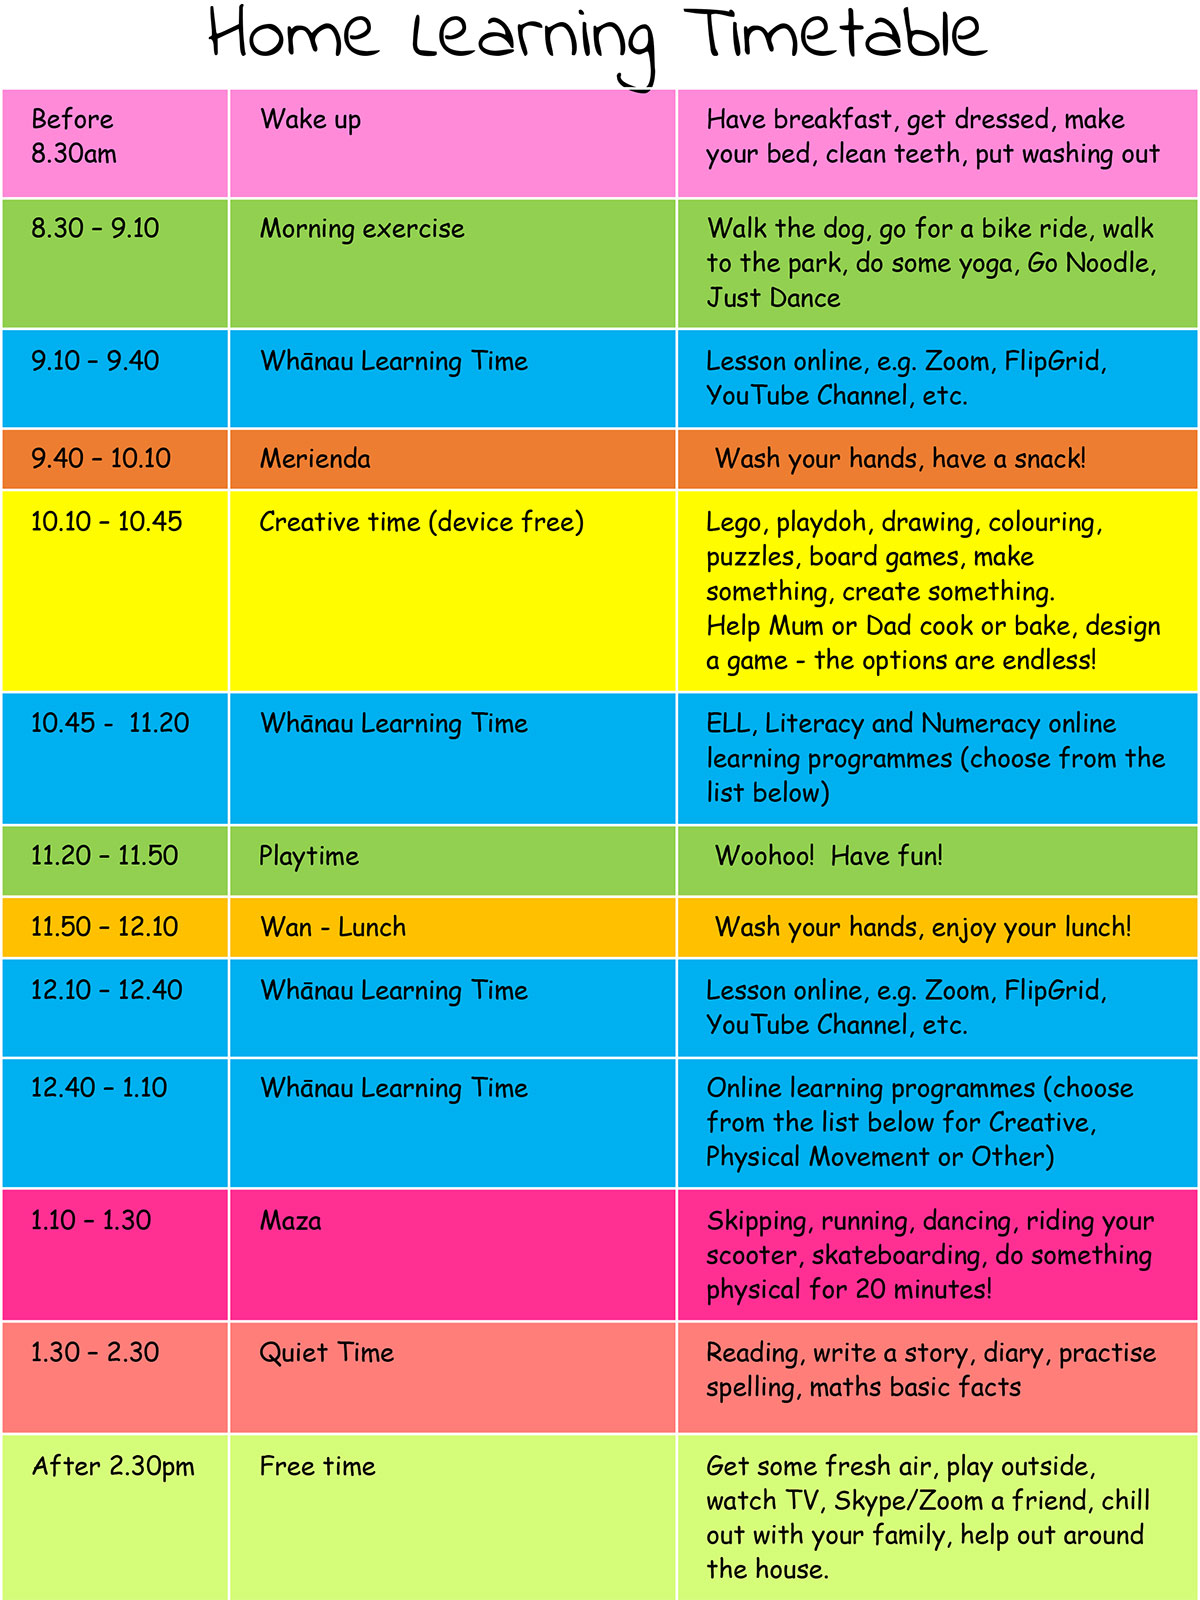 Home-Learning-Timetable